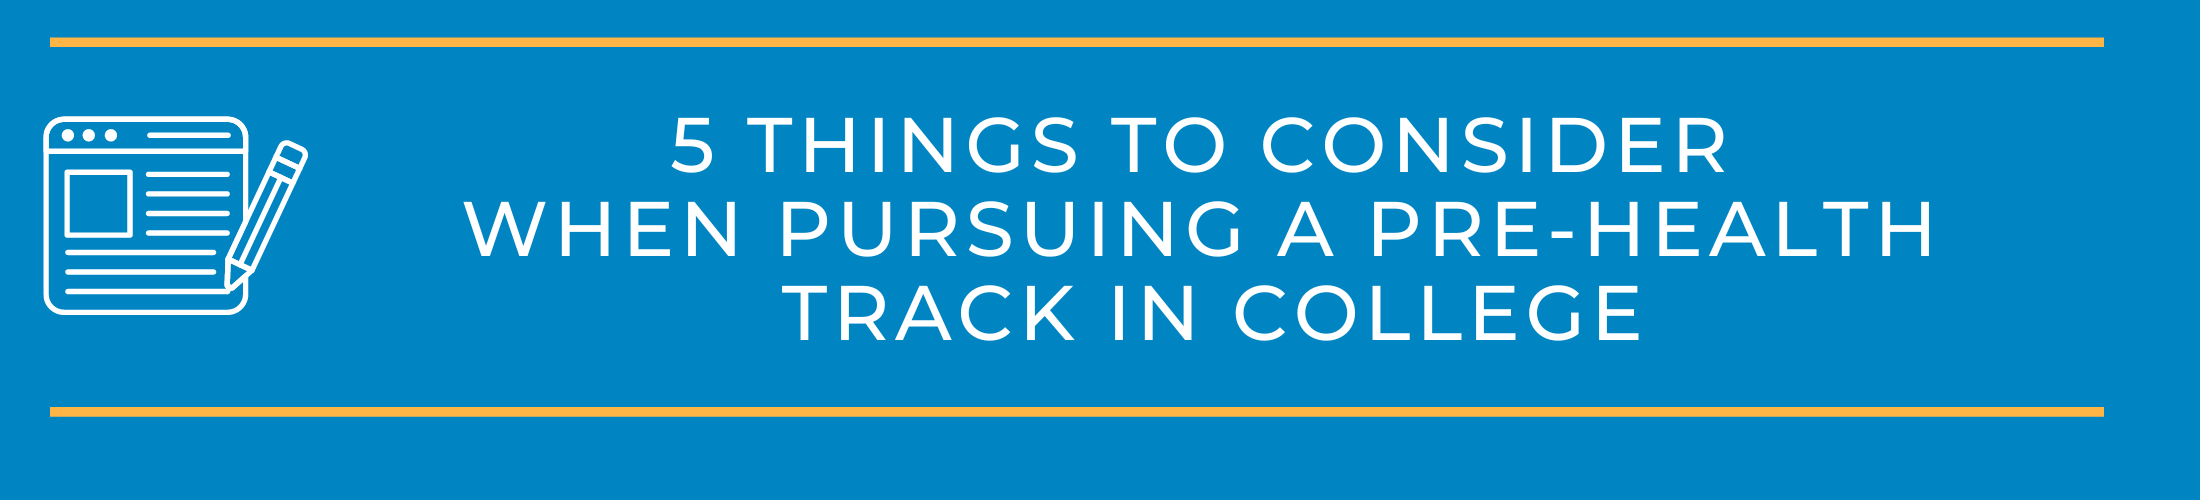 5 Things to Consider when Pursuing a Pre-Health Track in College